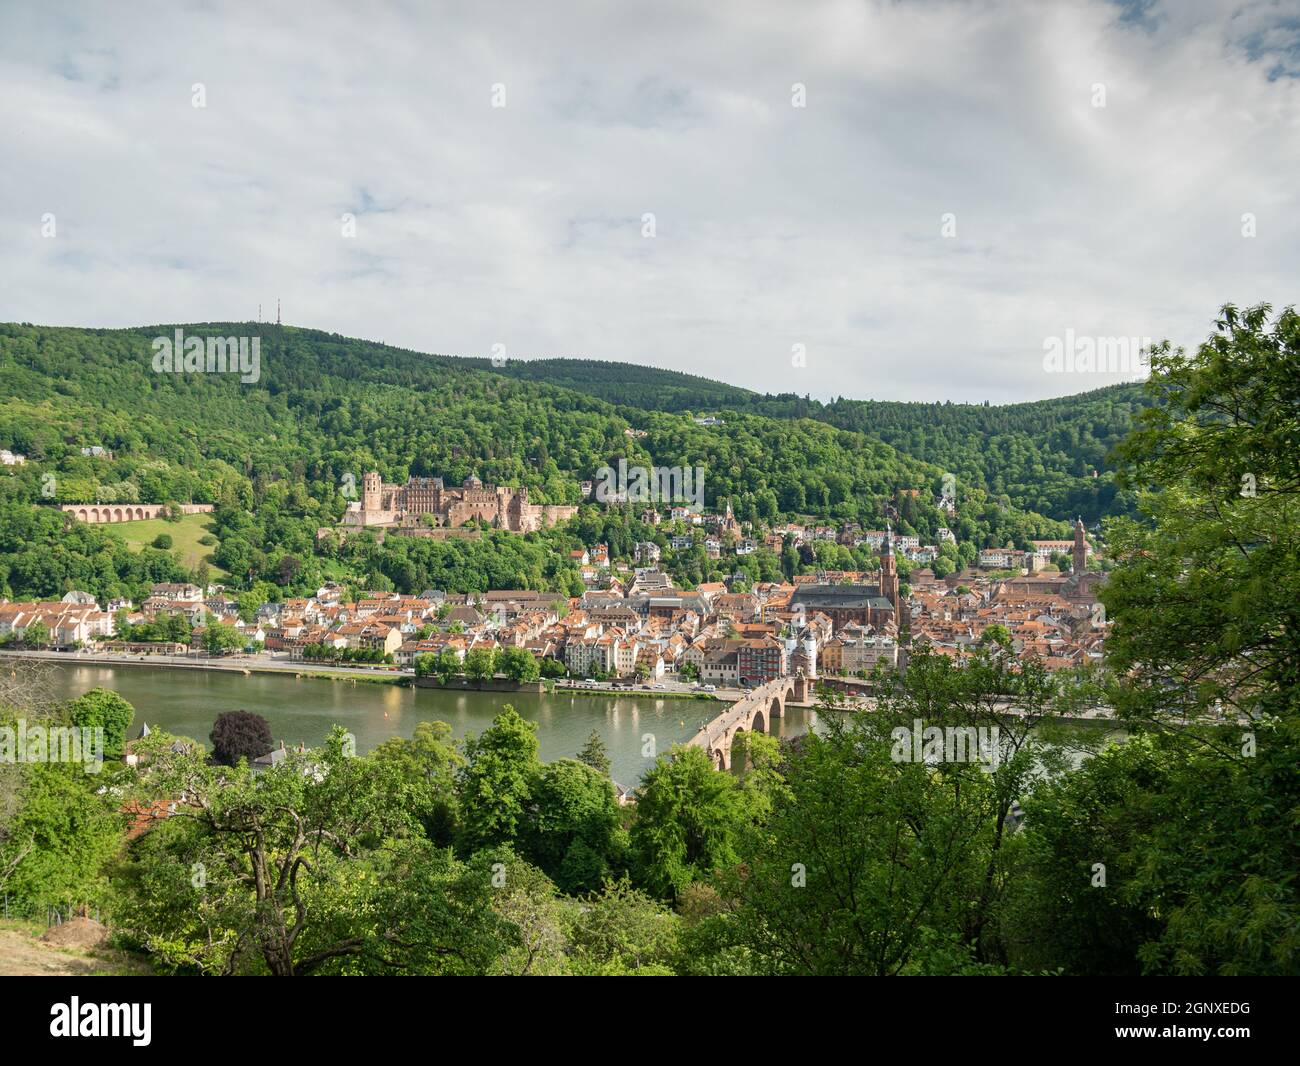 View of the city and castle Heidelberg on the Neckar River Stock Photo